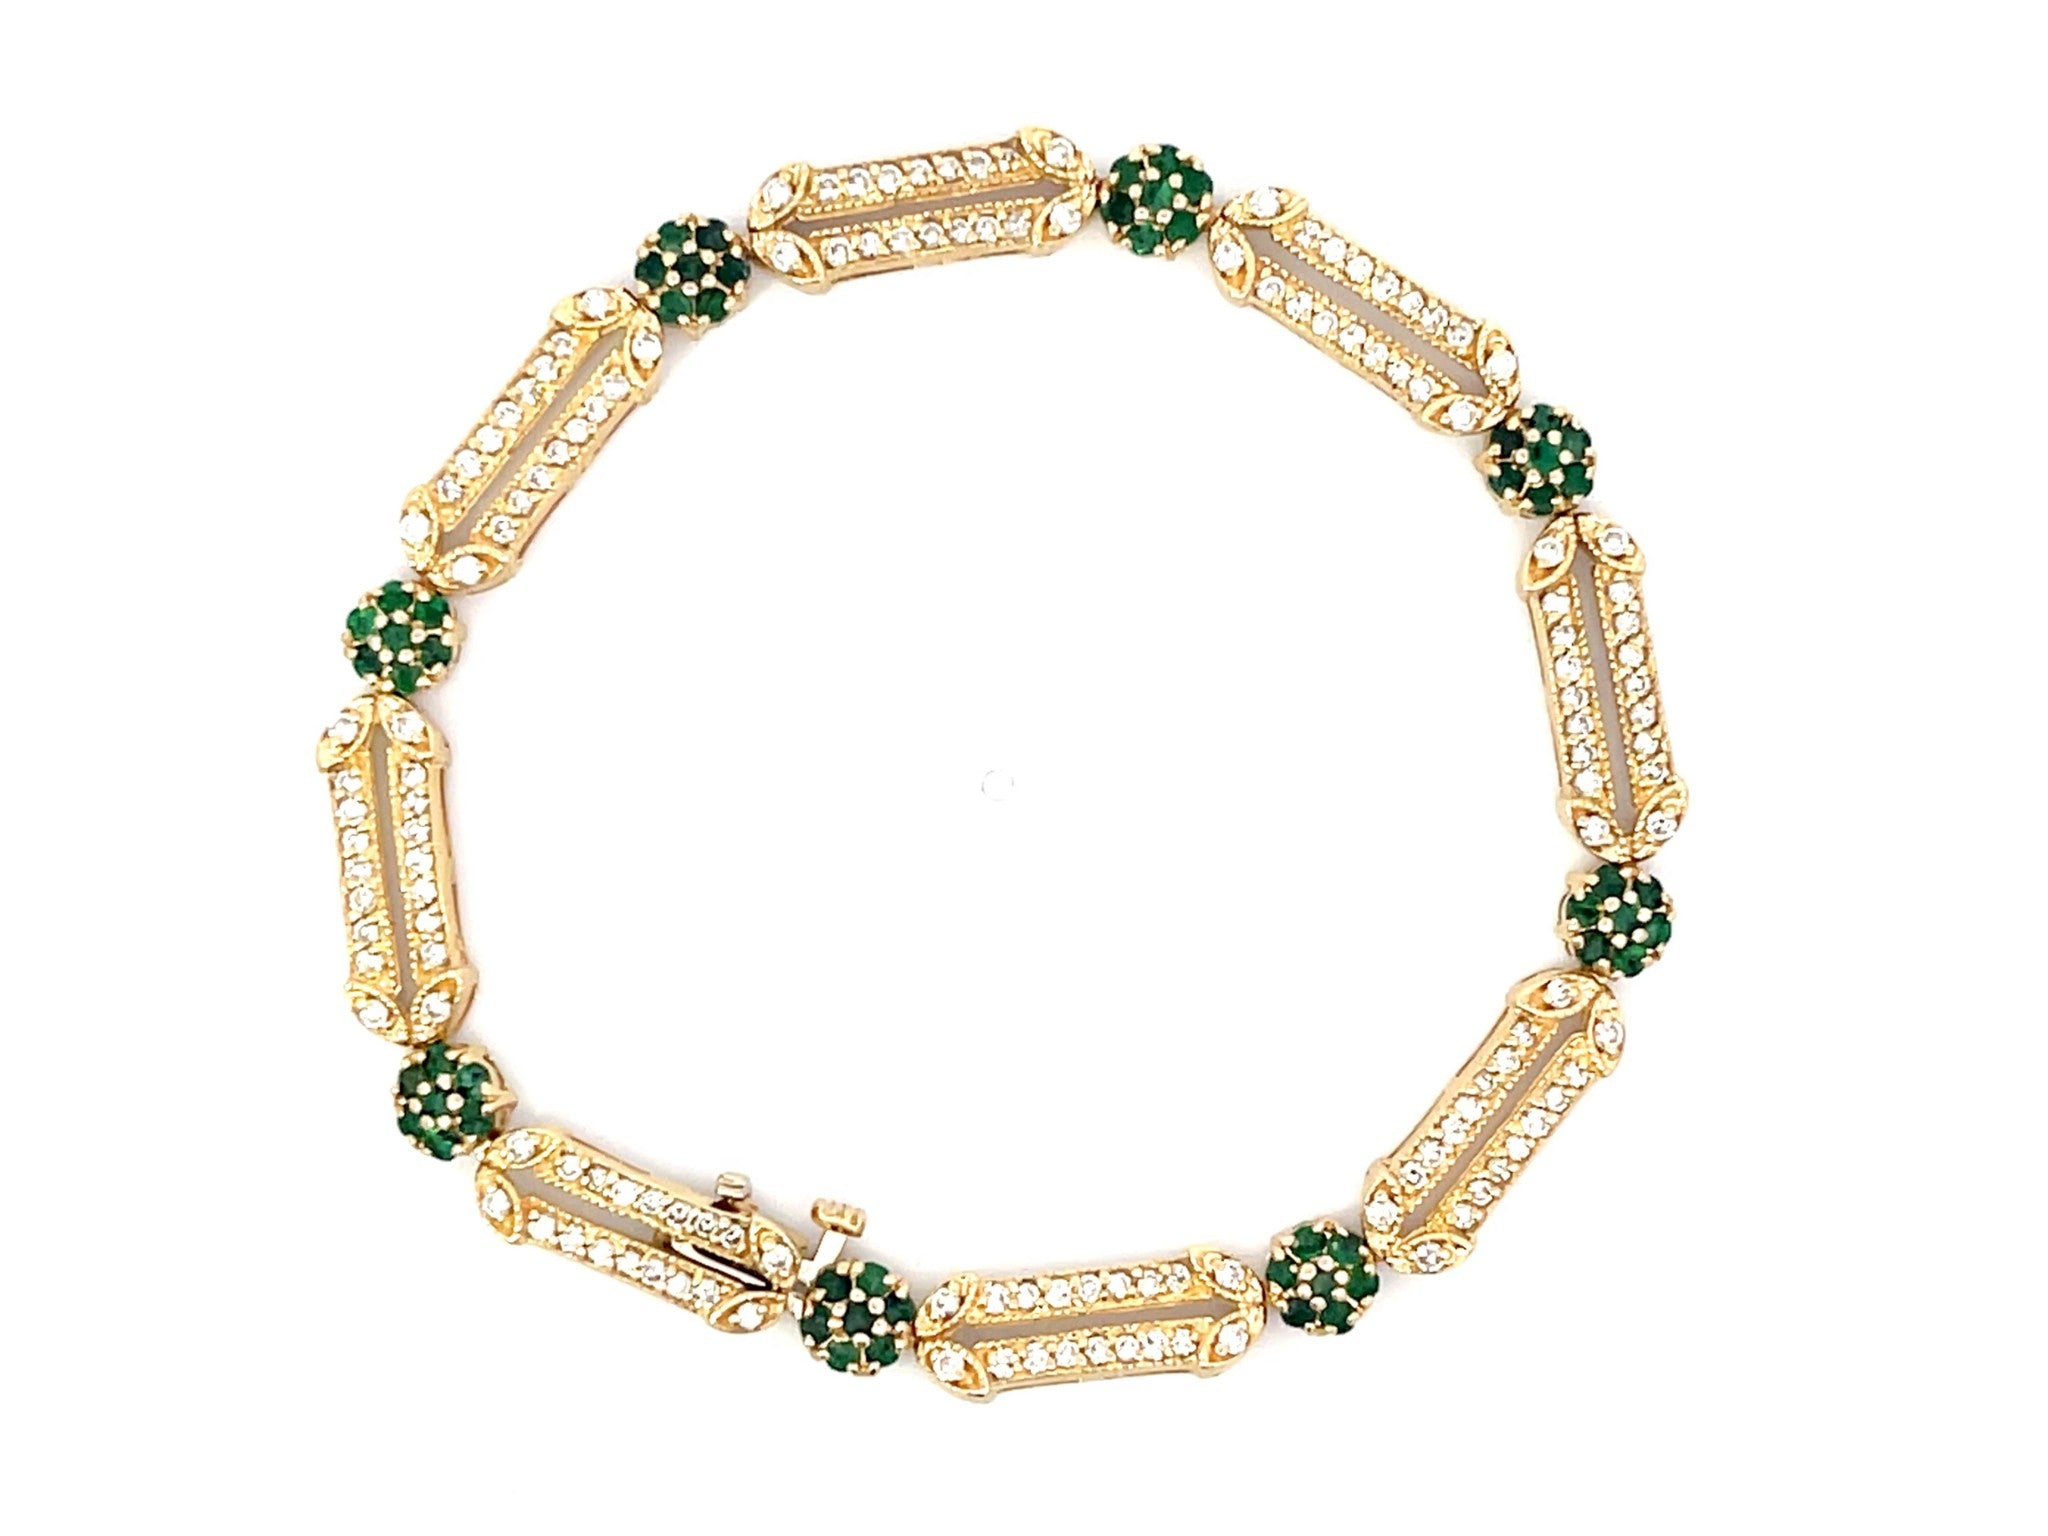 Emerald Flower and Diamond Link Bracelet in 14k Yellow Gold